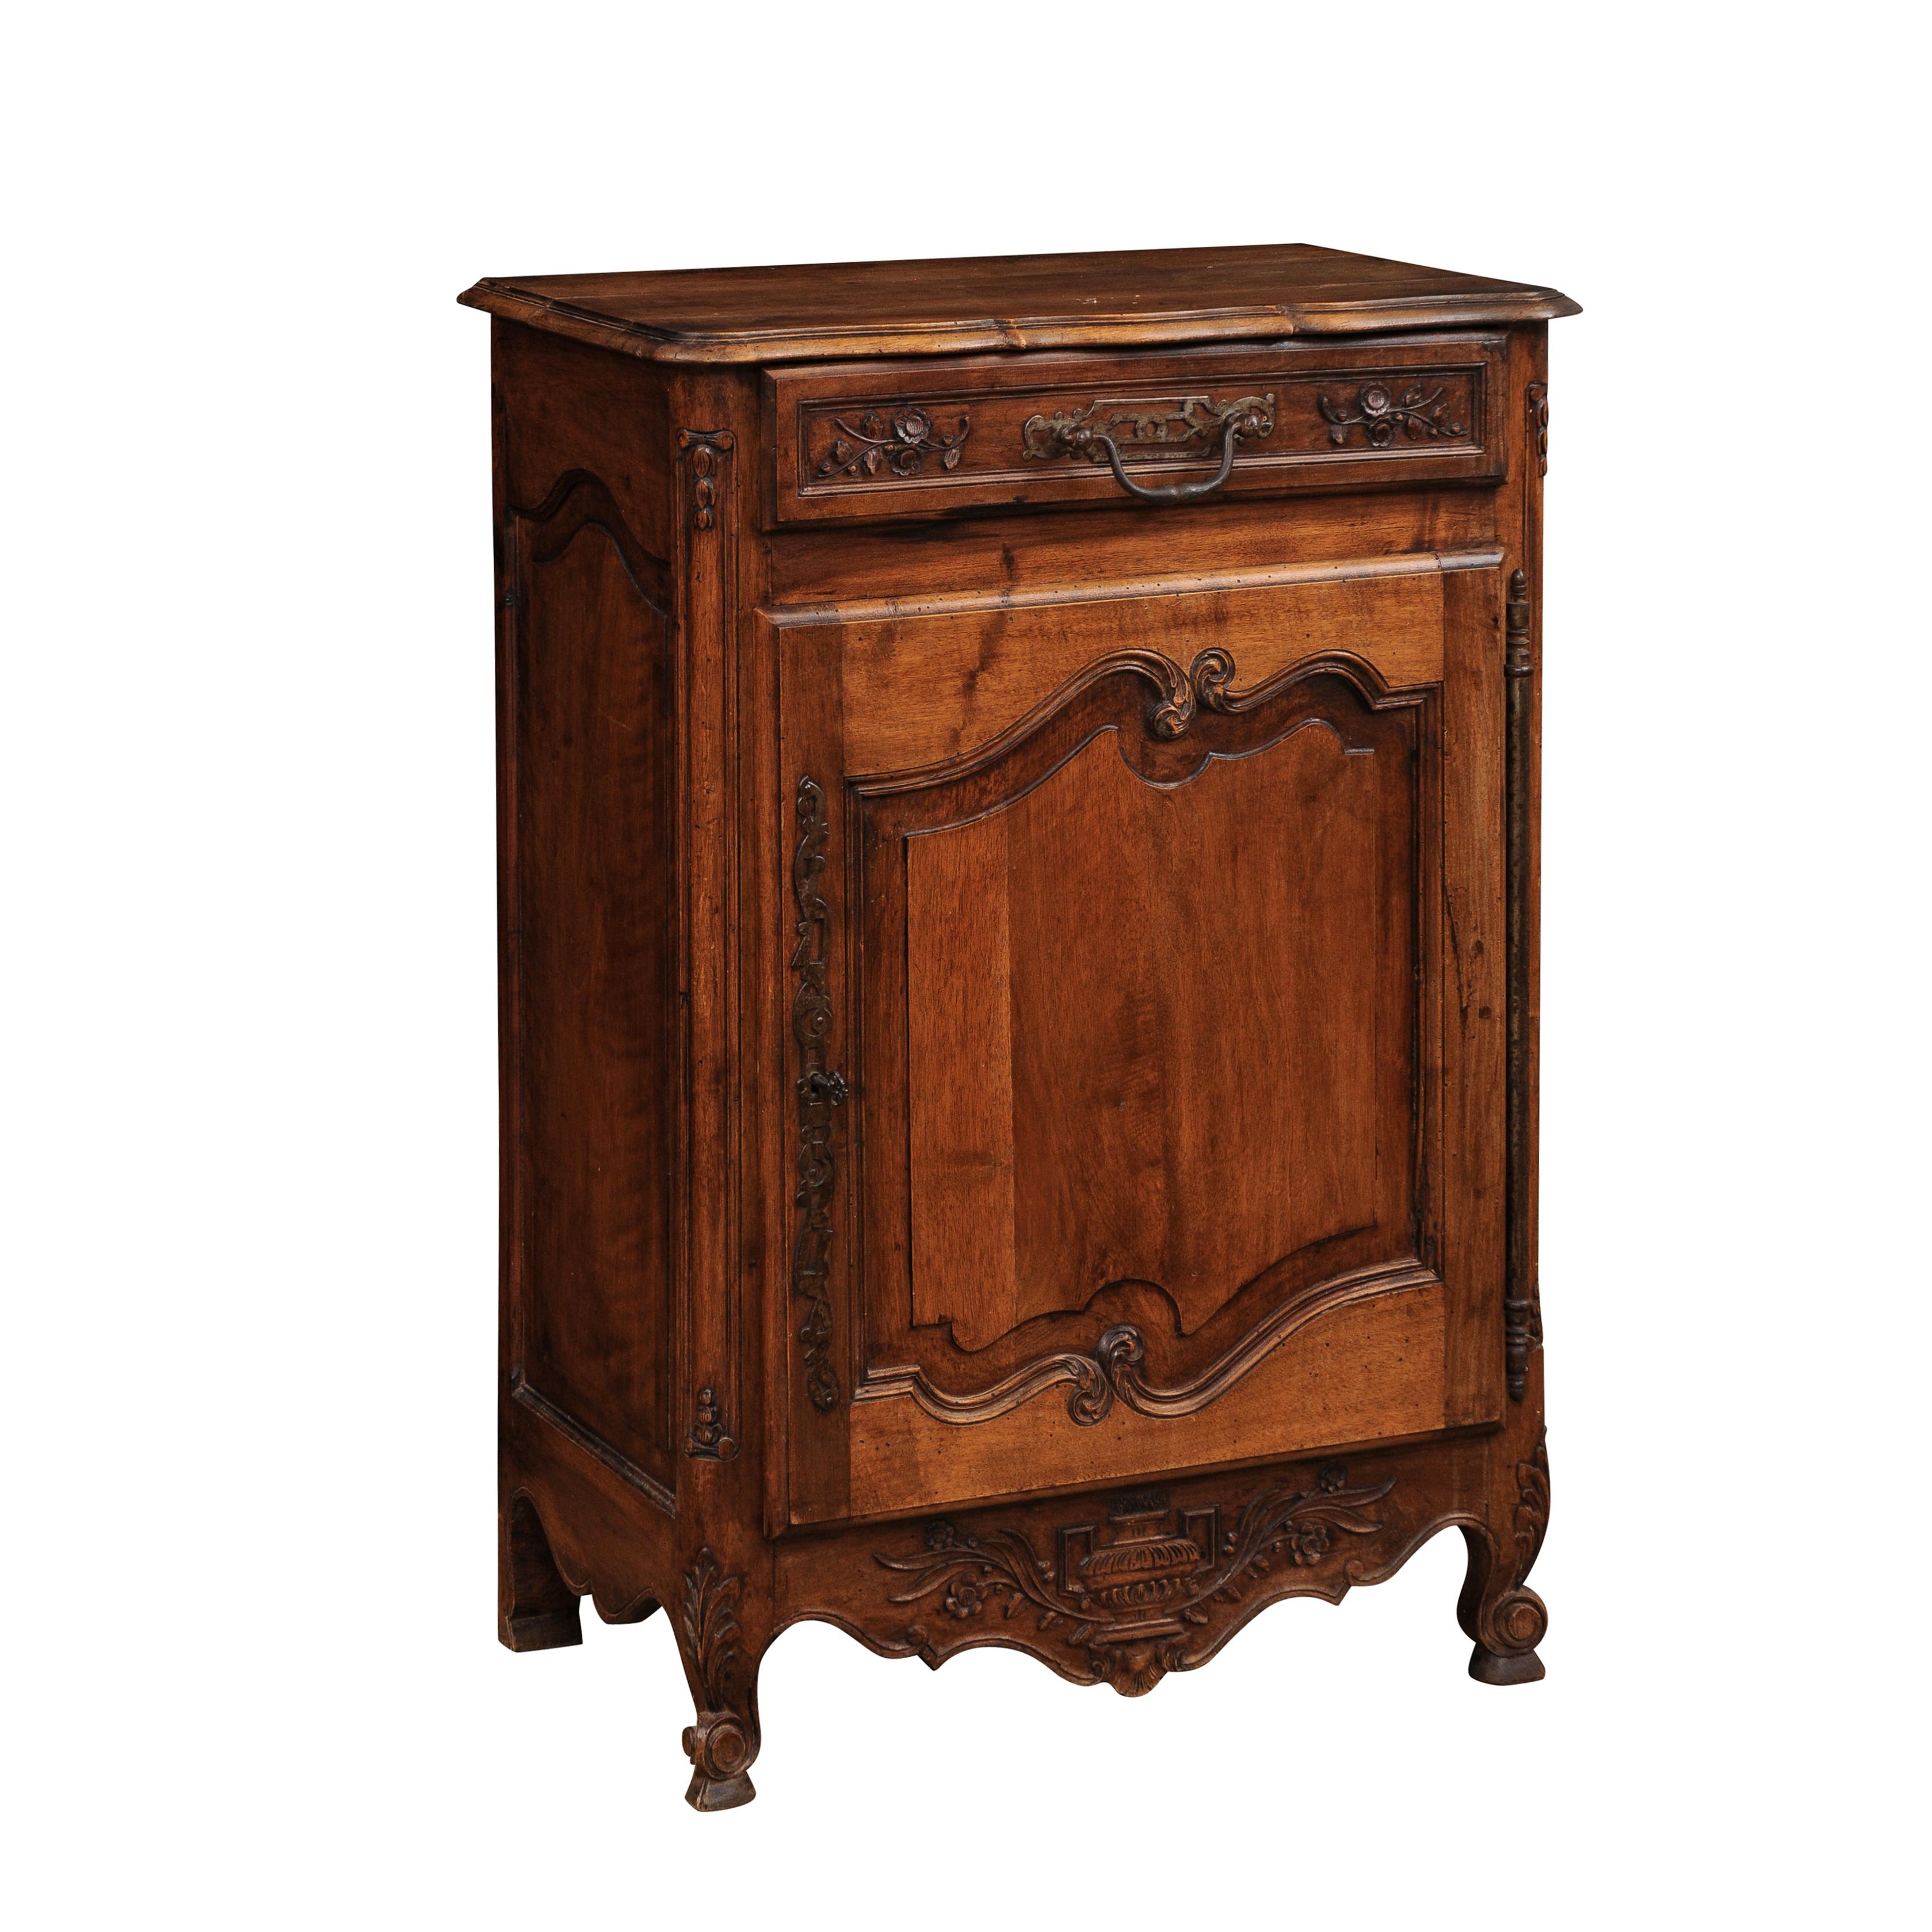 A French walnut confiturier from Provence with single drawer and single door, carved floral décor with vase. Embrace the charm of Provence with this delightful French walnut confiturier from the region. Crafted with care and adorned with exquisite